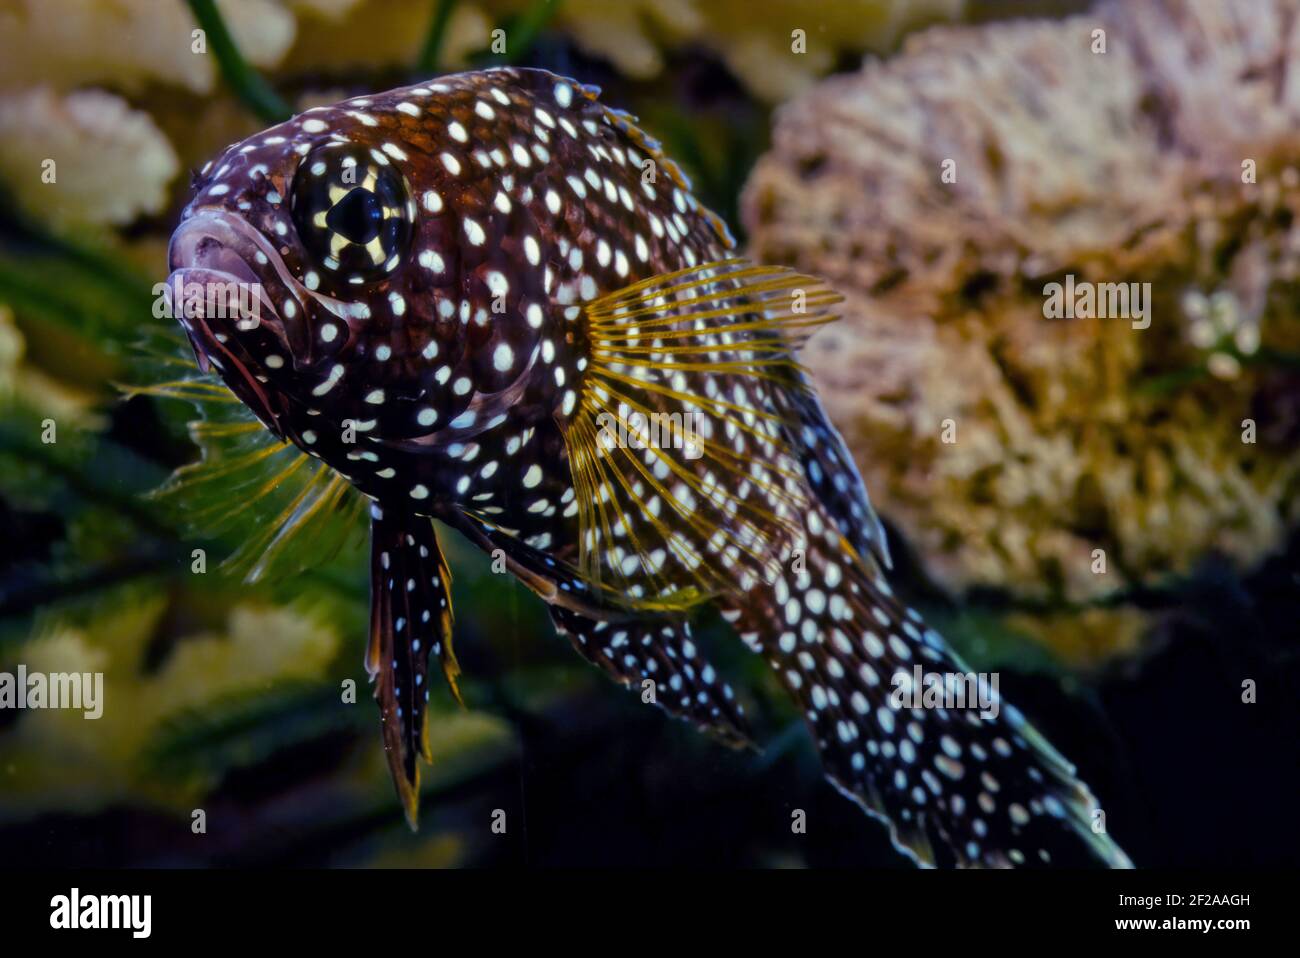 The comet or marine betta (Calloplesiops altivelis) is a species of reef-associated tropical marine fish in the longfin family Plesiopidae, most commo Stock Photo